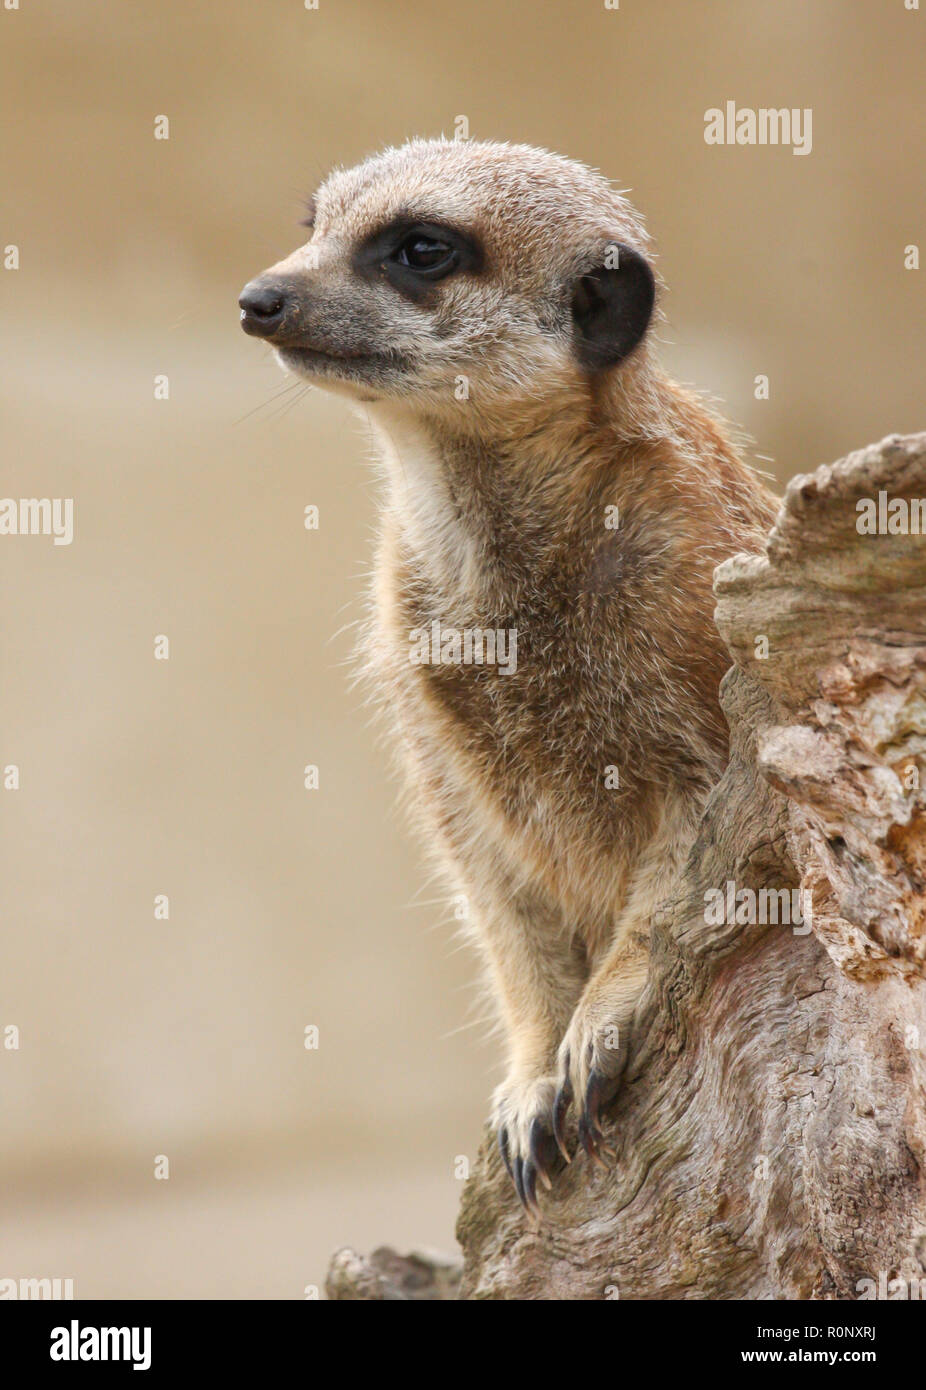 Close up of meerkat taken at a zoo in England, UK Stock Photo